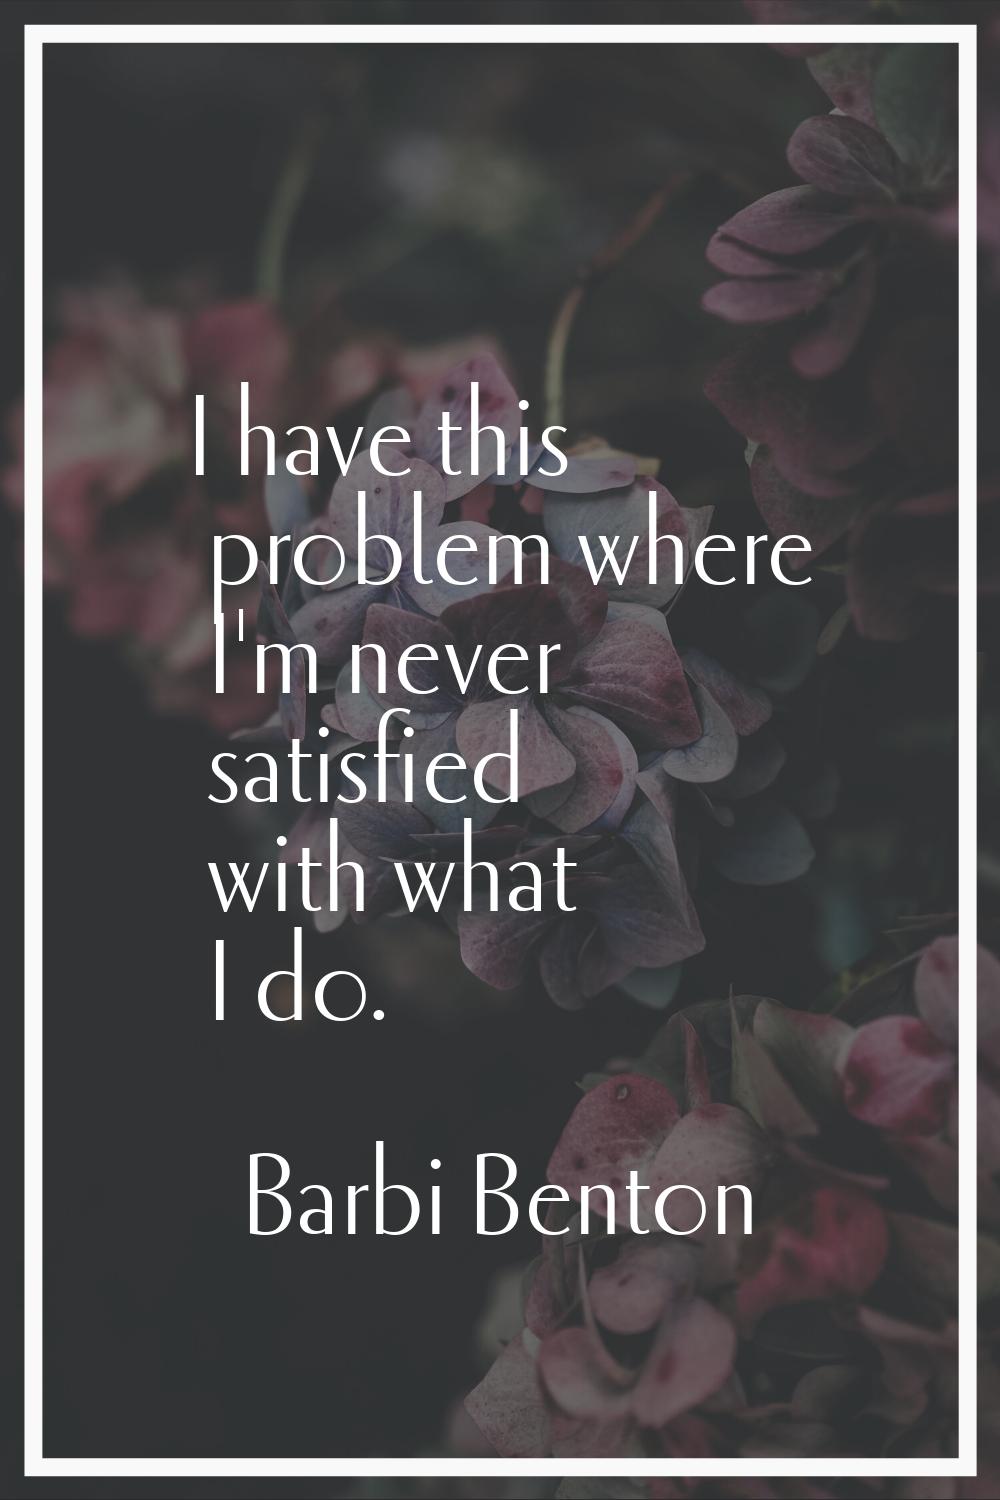 I have this problem where I'm never satisfied with what I do.